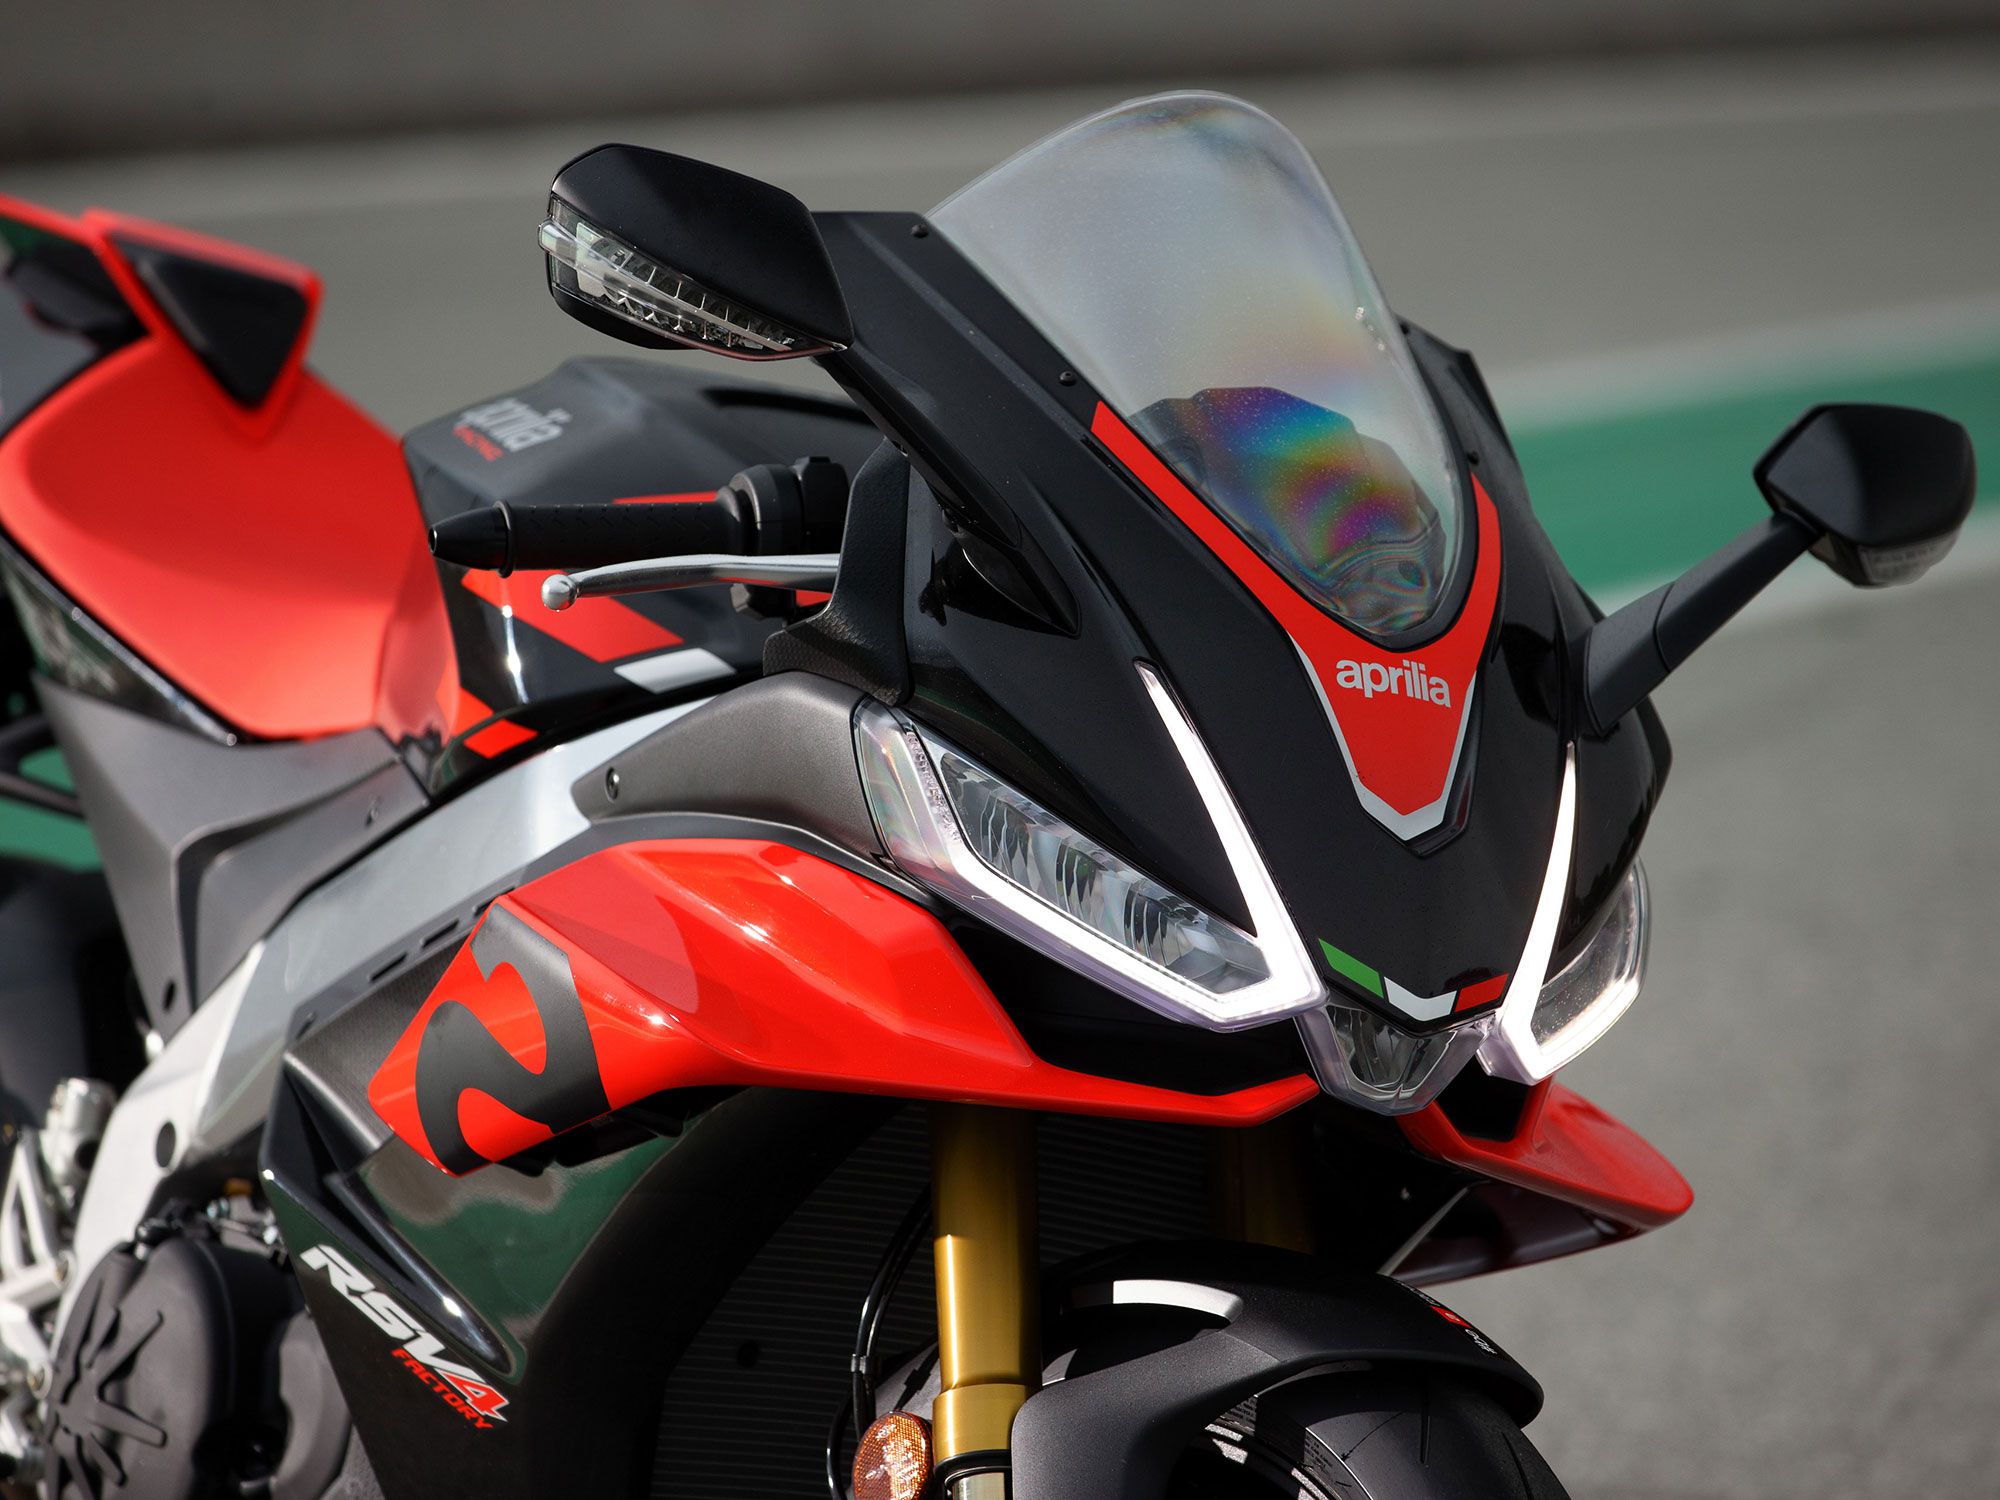 The RSV4’s front fairing is broader, which better shields the rider in the tucked position.